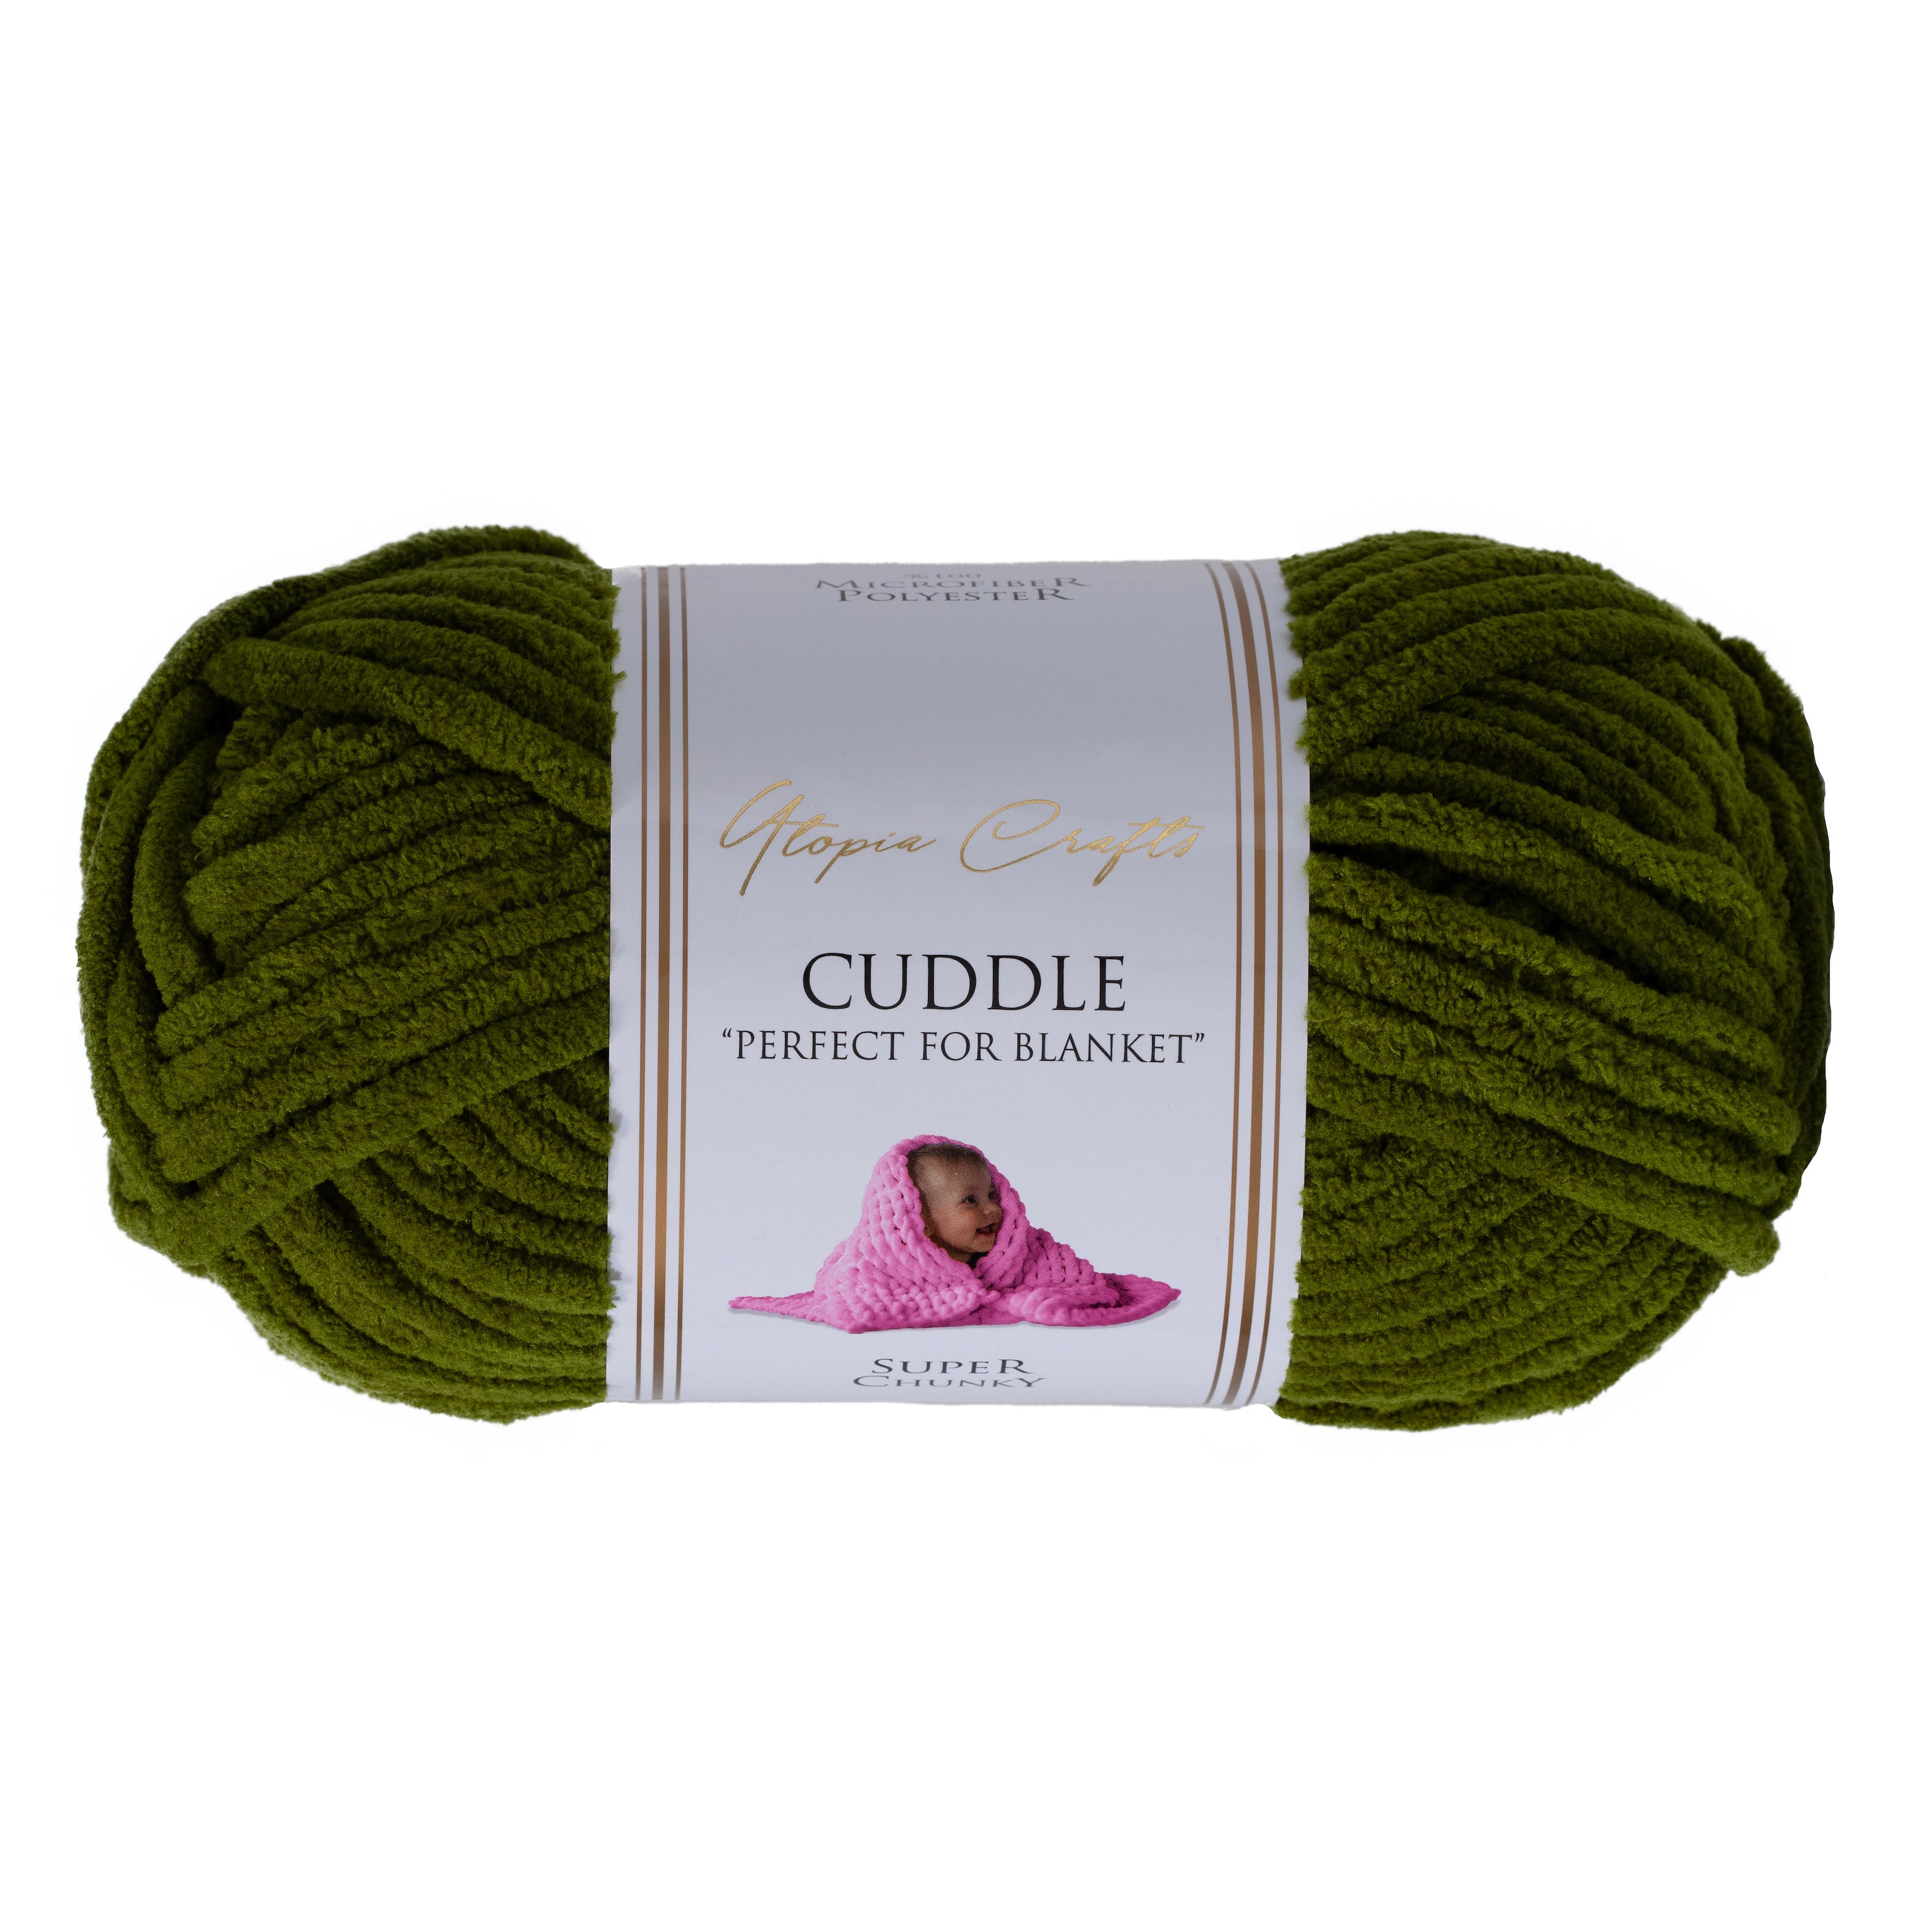 Utopia Crafts Cuddle Super Chunky Chenille Soft Yarn for Knitting and Crochet, 100g - 60m (Olive Green)